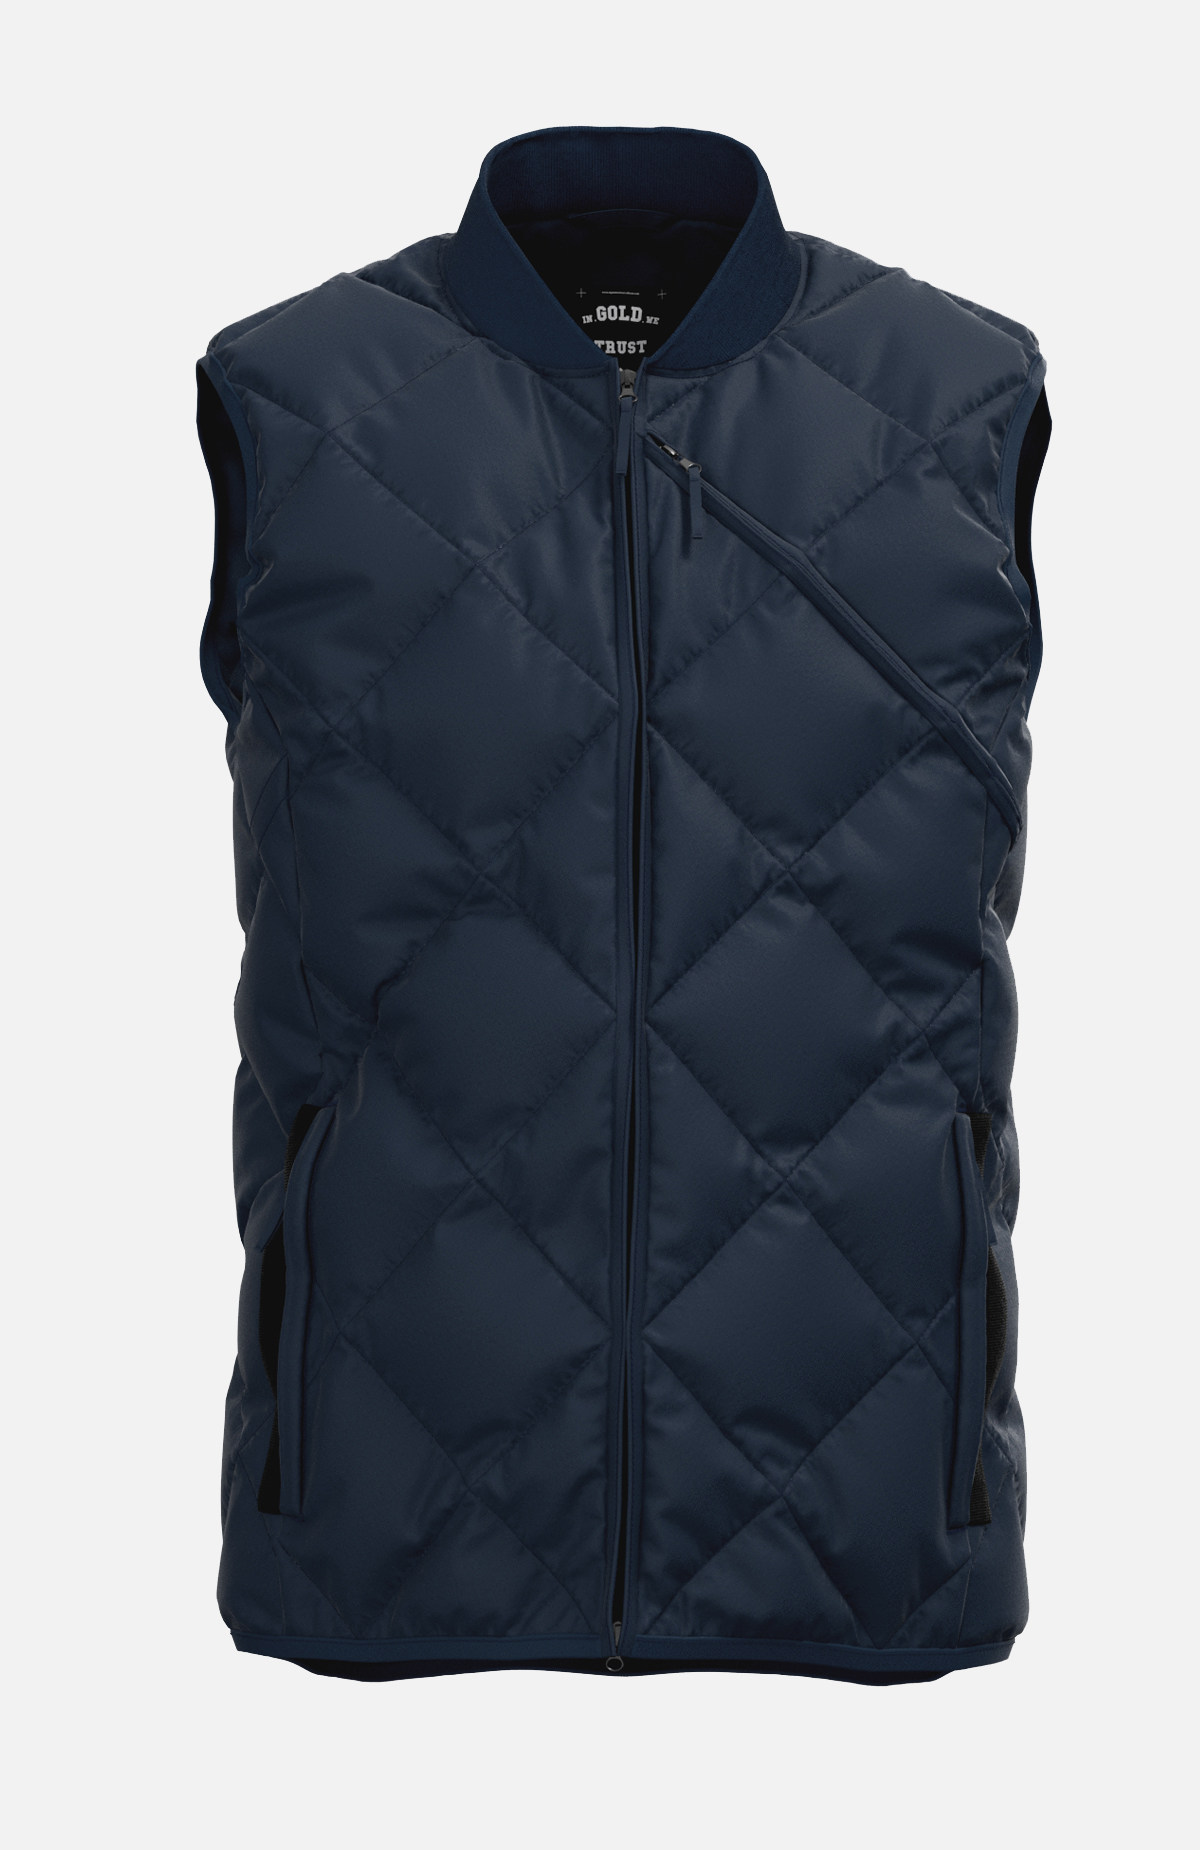 In Gold We Trust x Nomad The Woods Bodywarmer